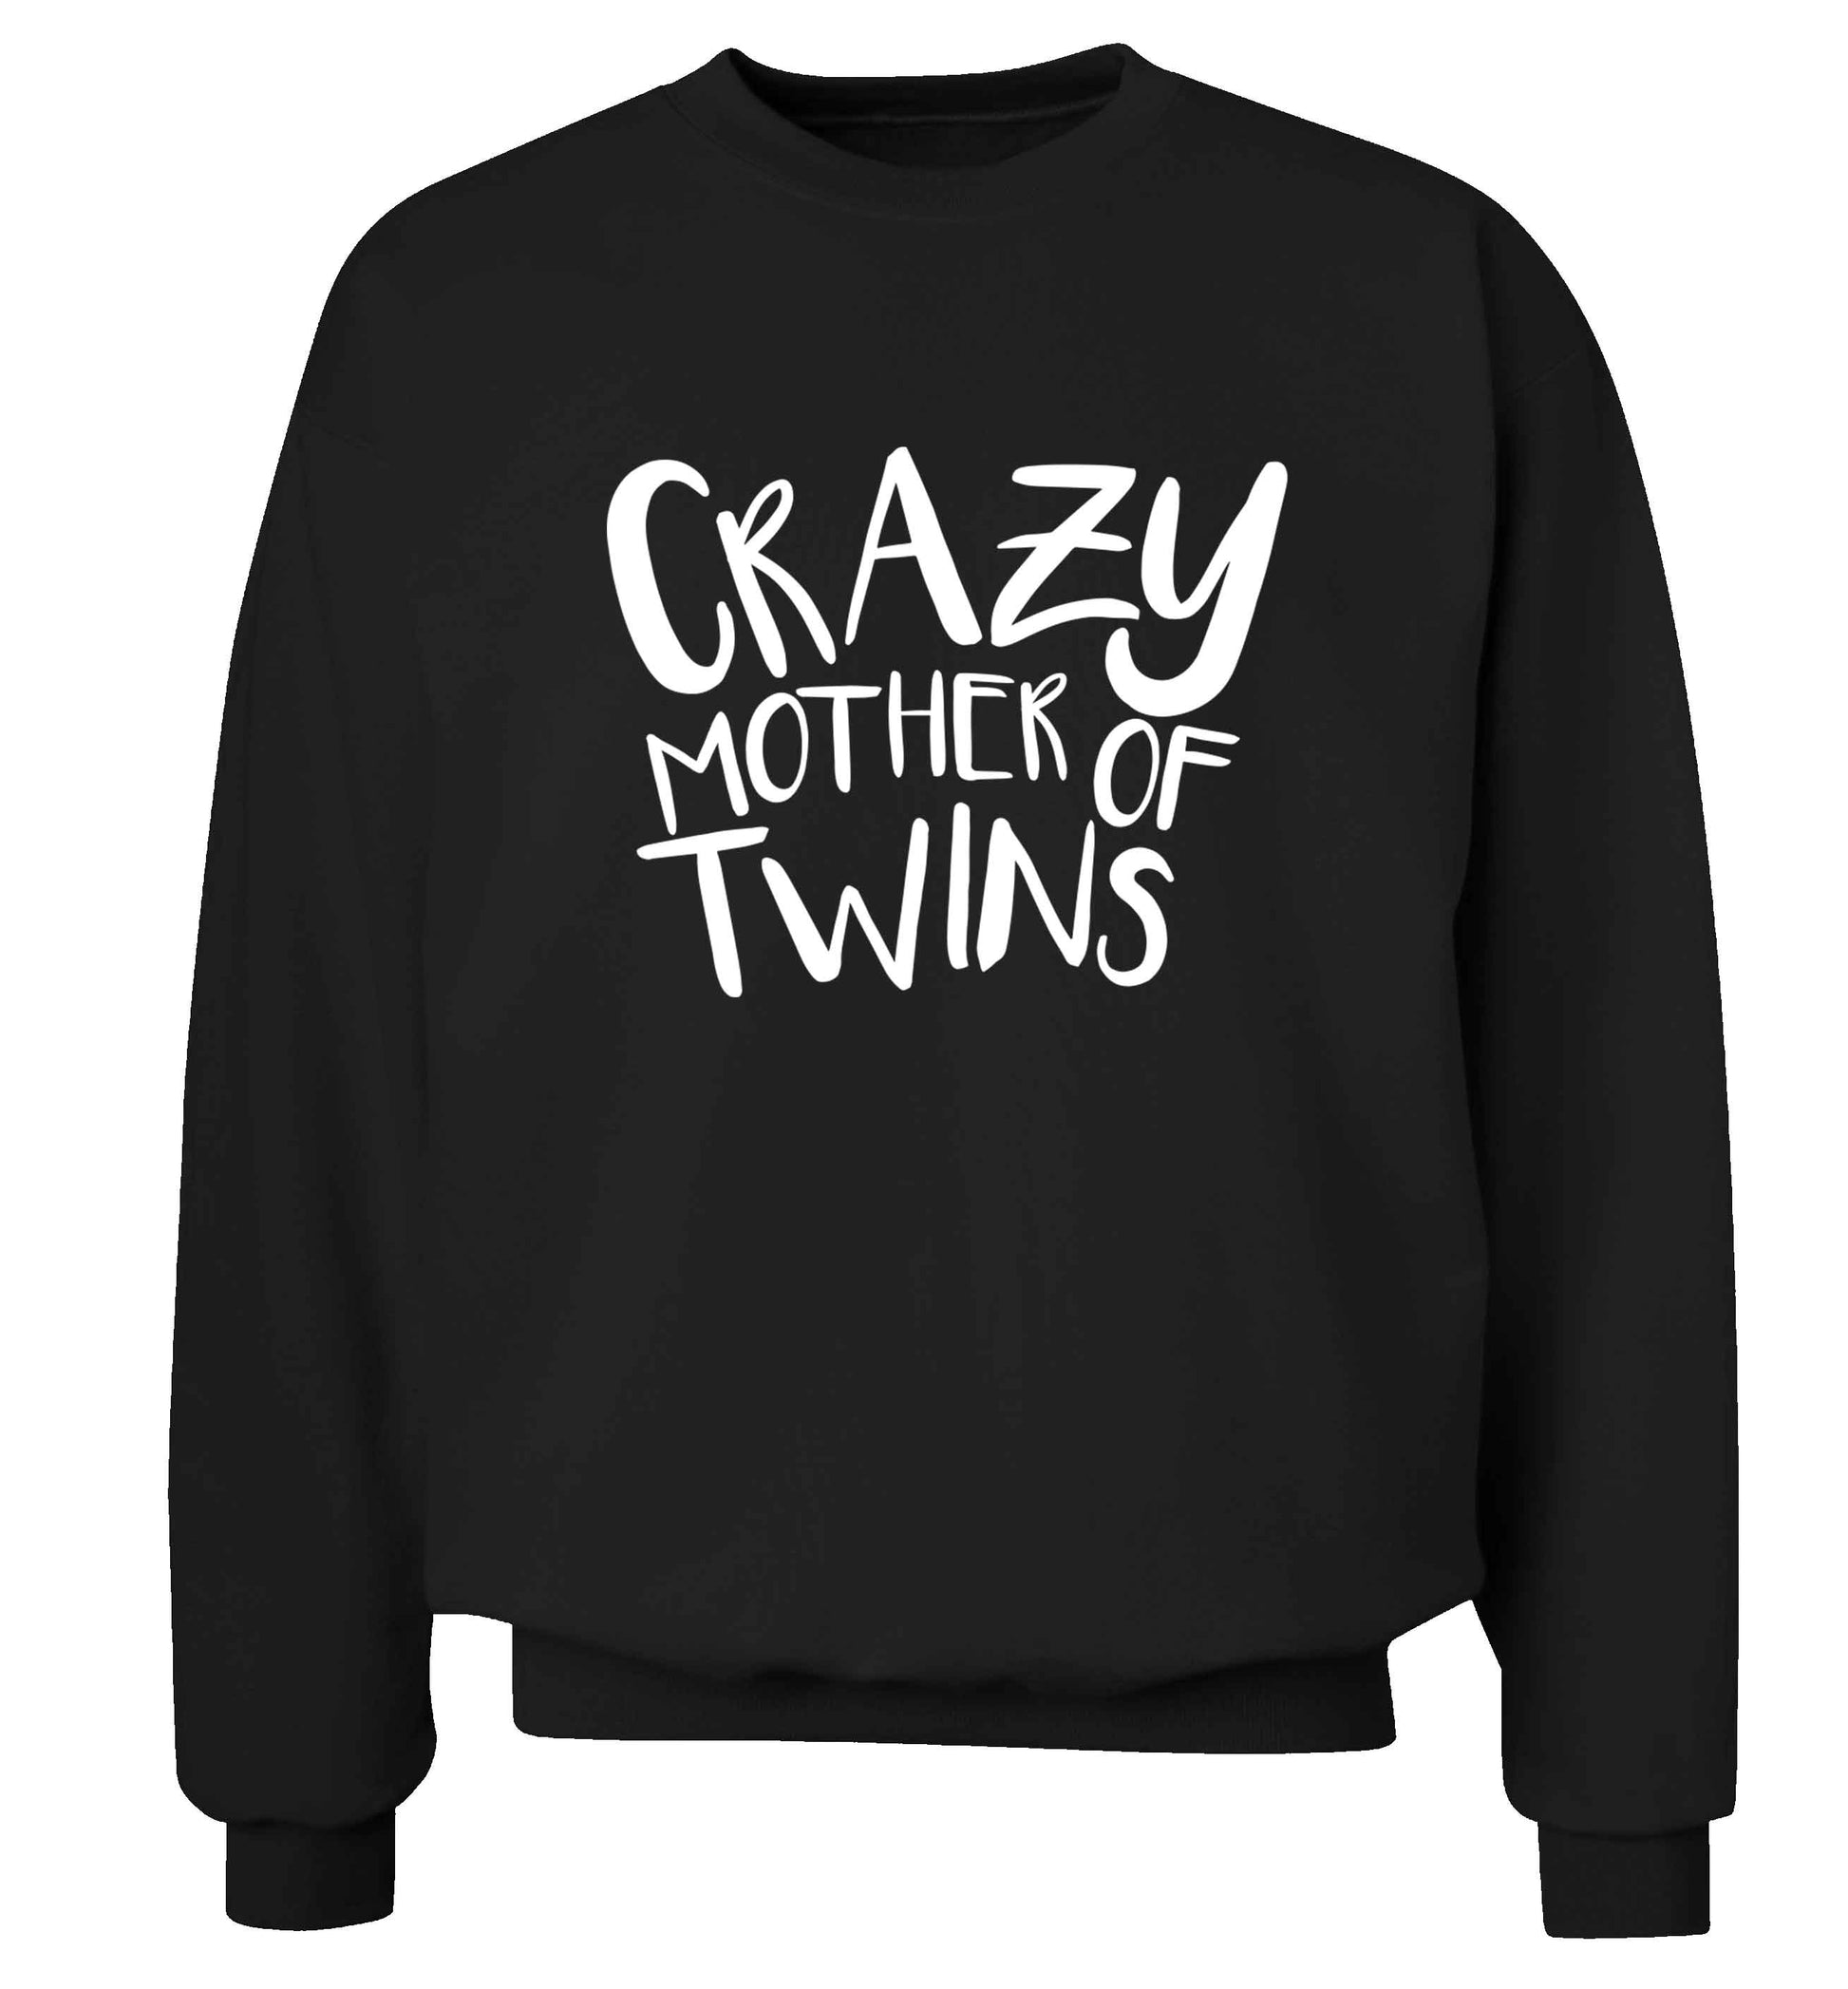 Crazy mother of twins adult's unisex black sweater 2XL